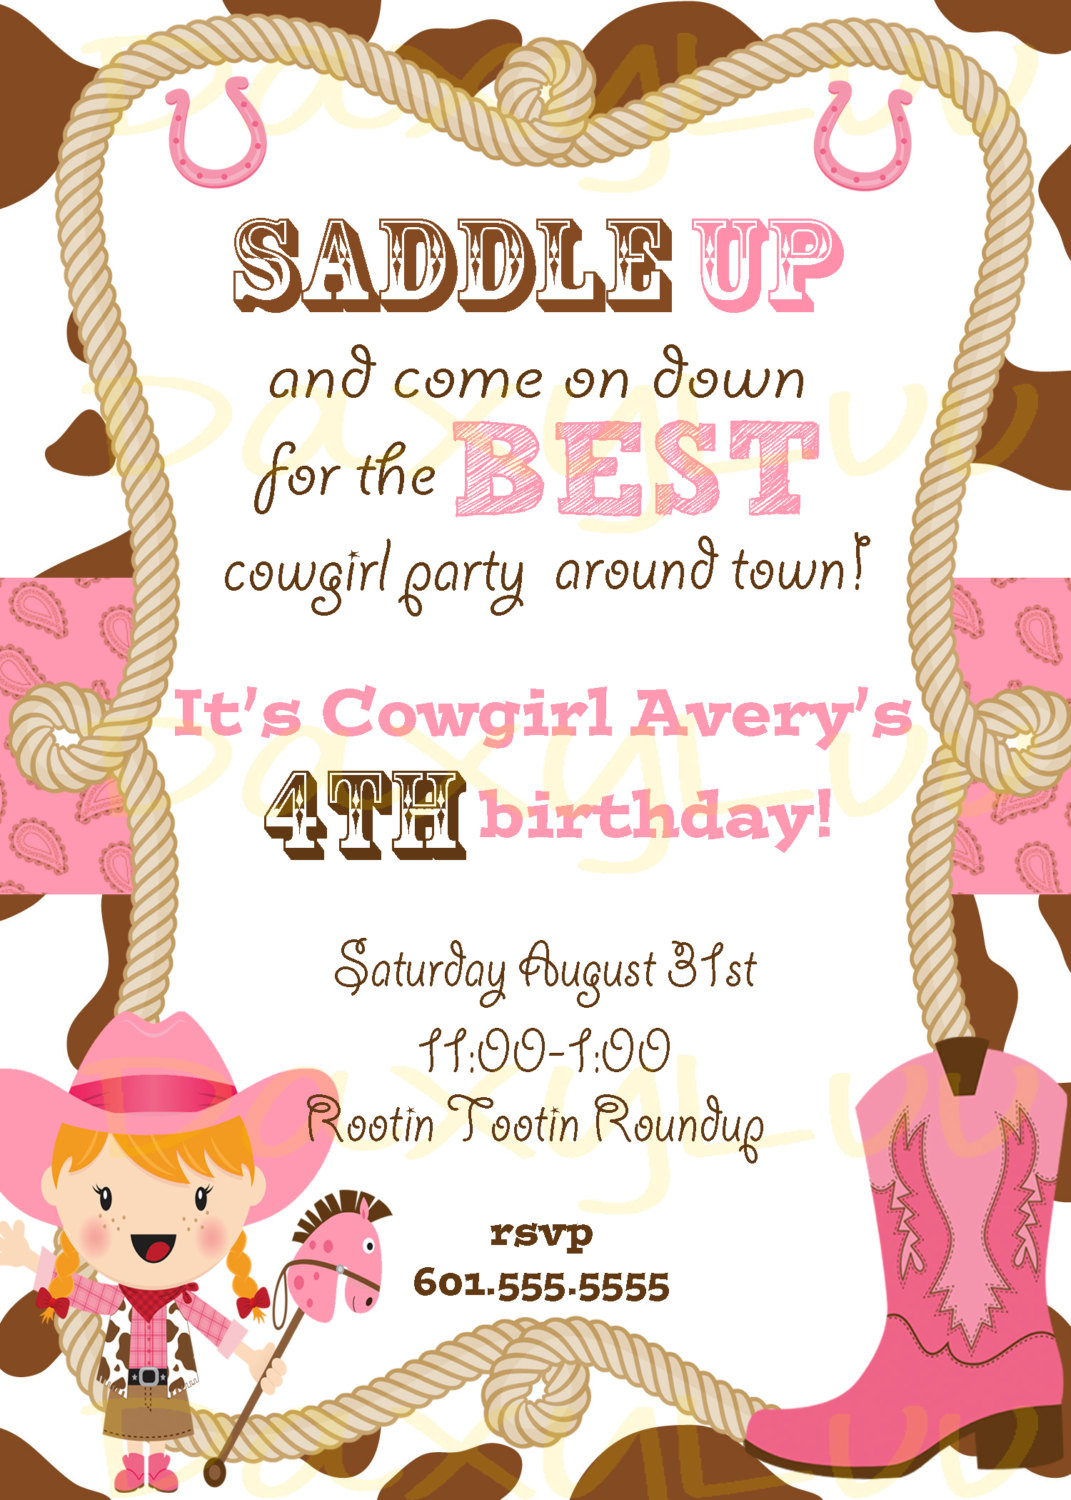 Cowgirl Birthday Invitations
 Cowgirl Birthday Party Invitation Pink and Brown